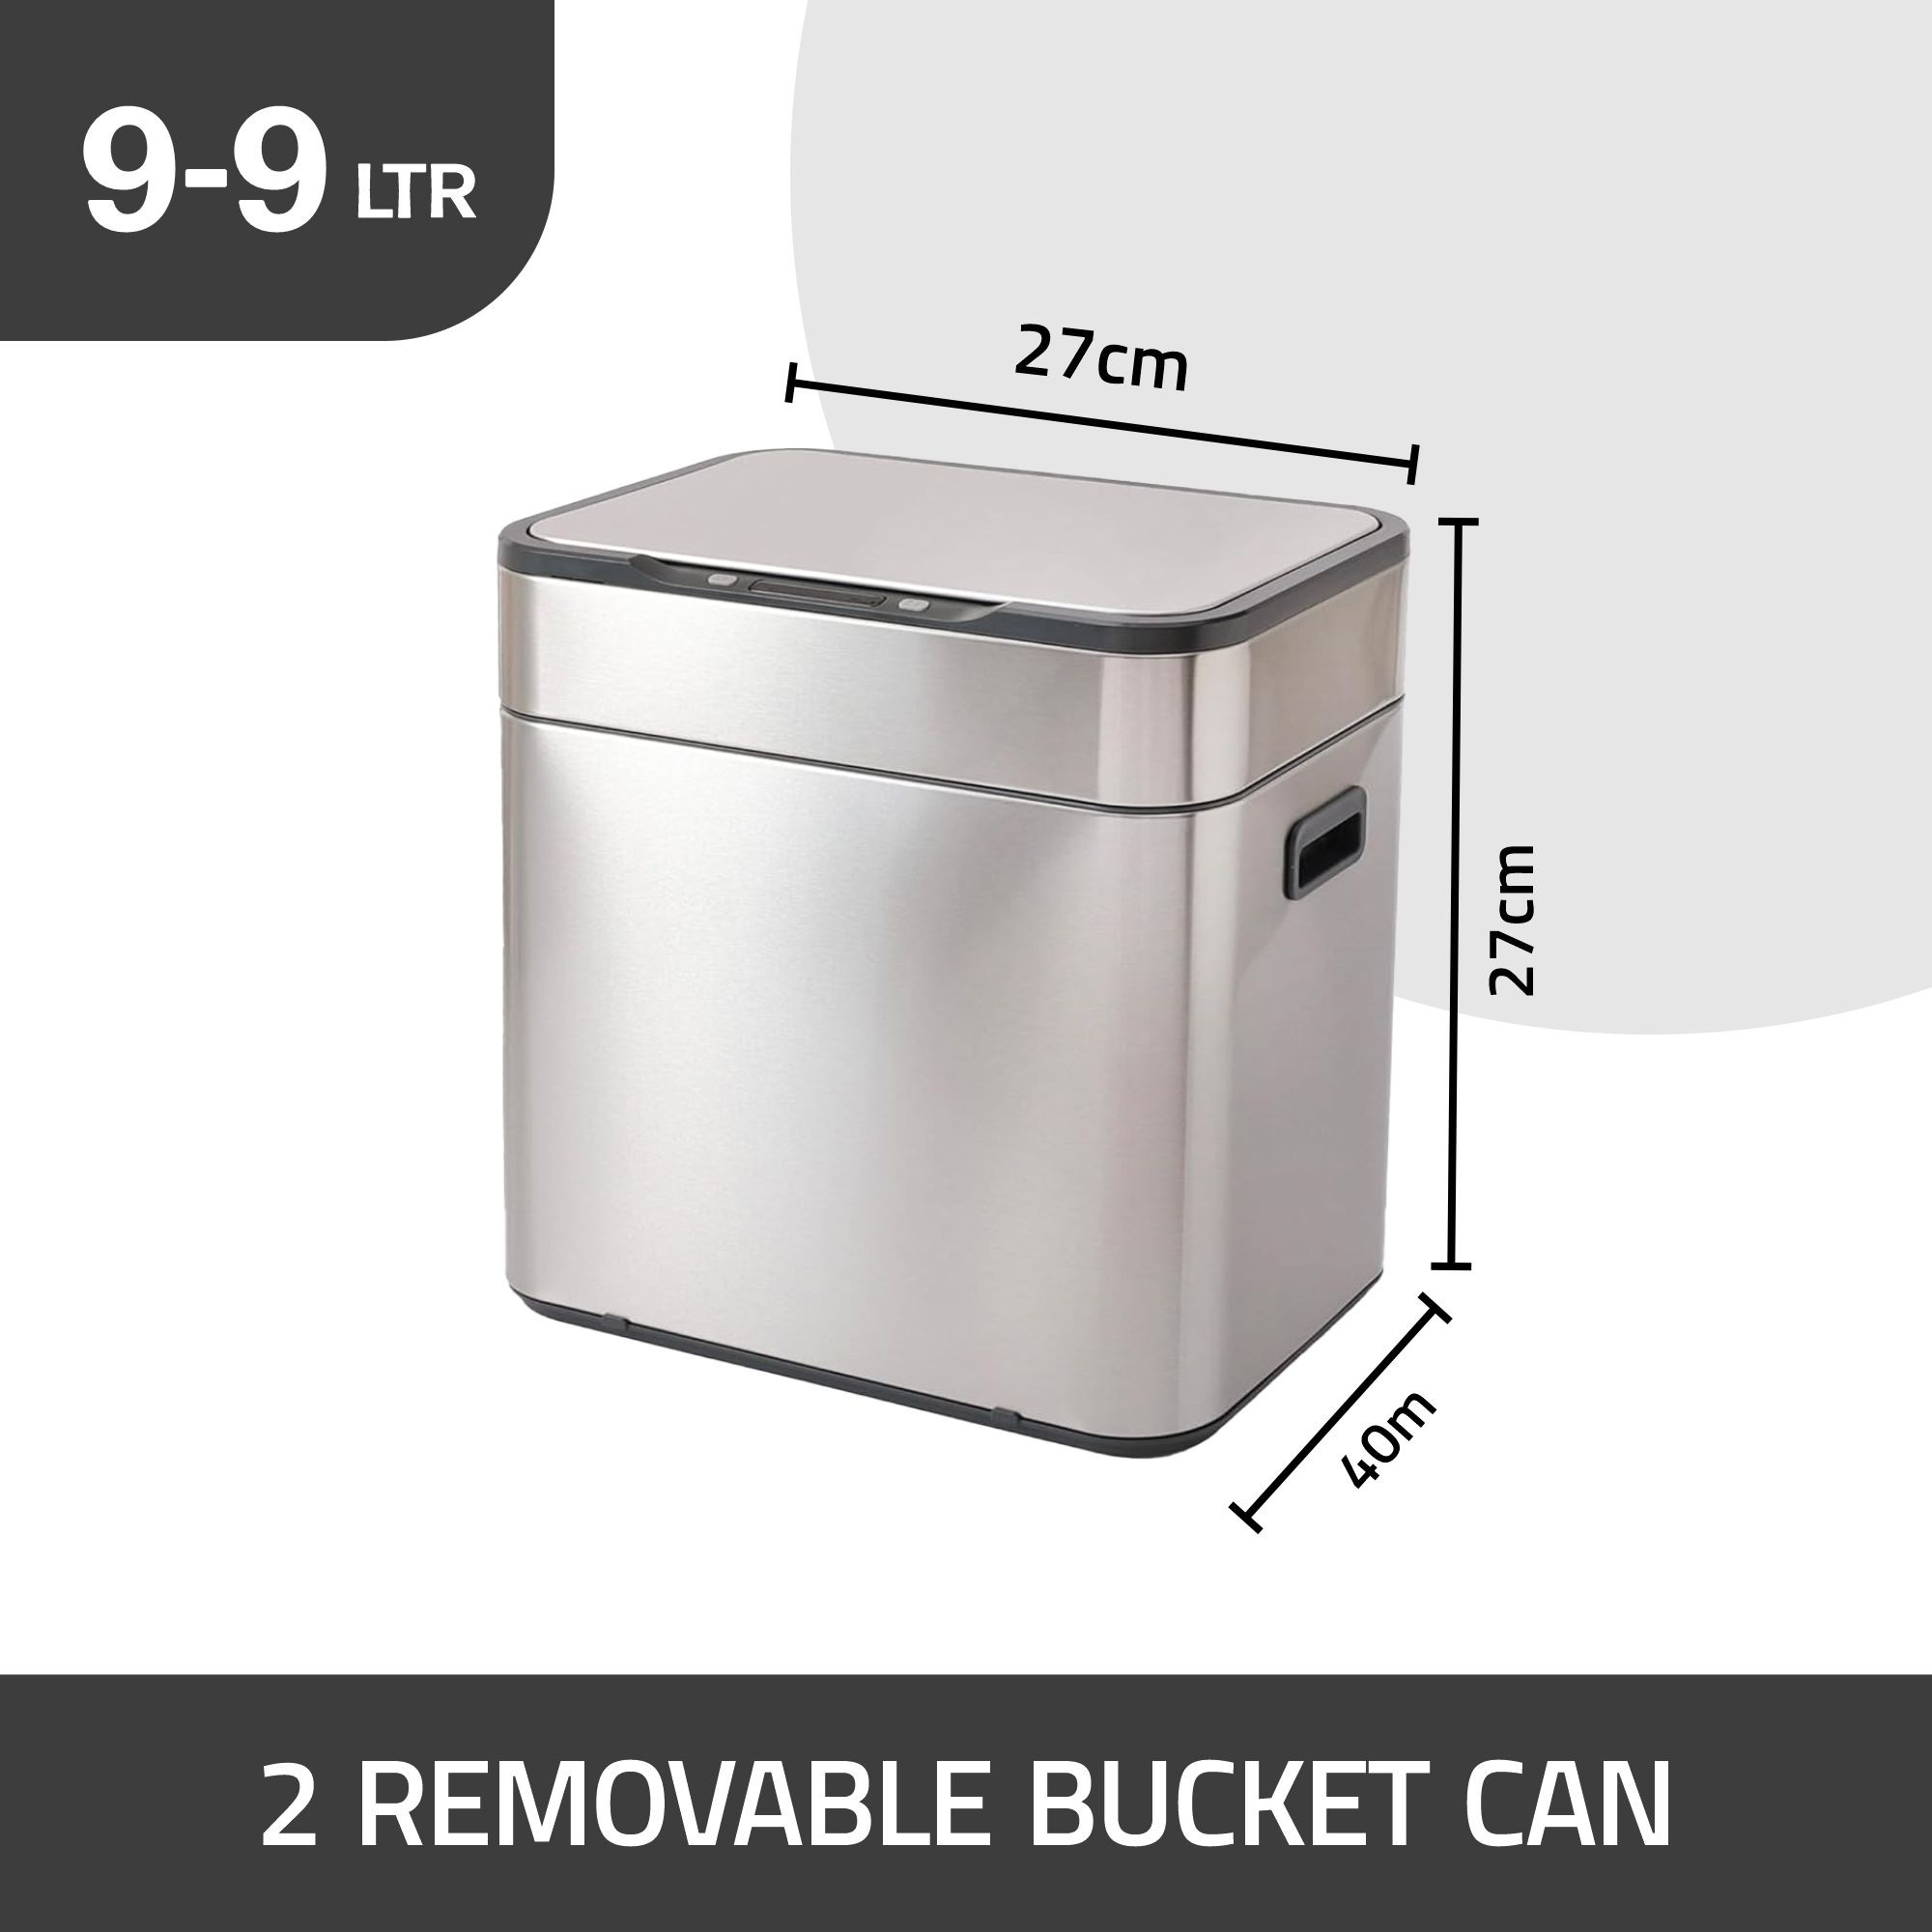 Kuber Industries Sensor Dustbin | Dual Compartment Sensor Dustbin | Touchless Trash Can | Smart Dustbin for Bedroom-Office-Living Room | 2 Removable Bucket Can | YW-5511 | 9 LTR | Silver